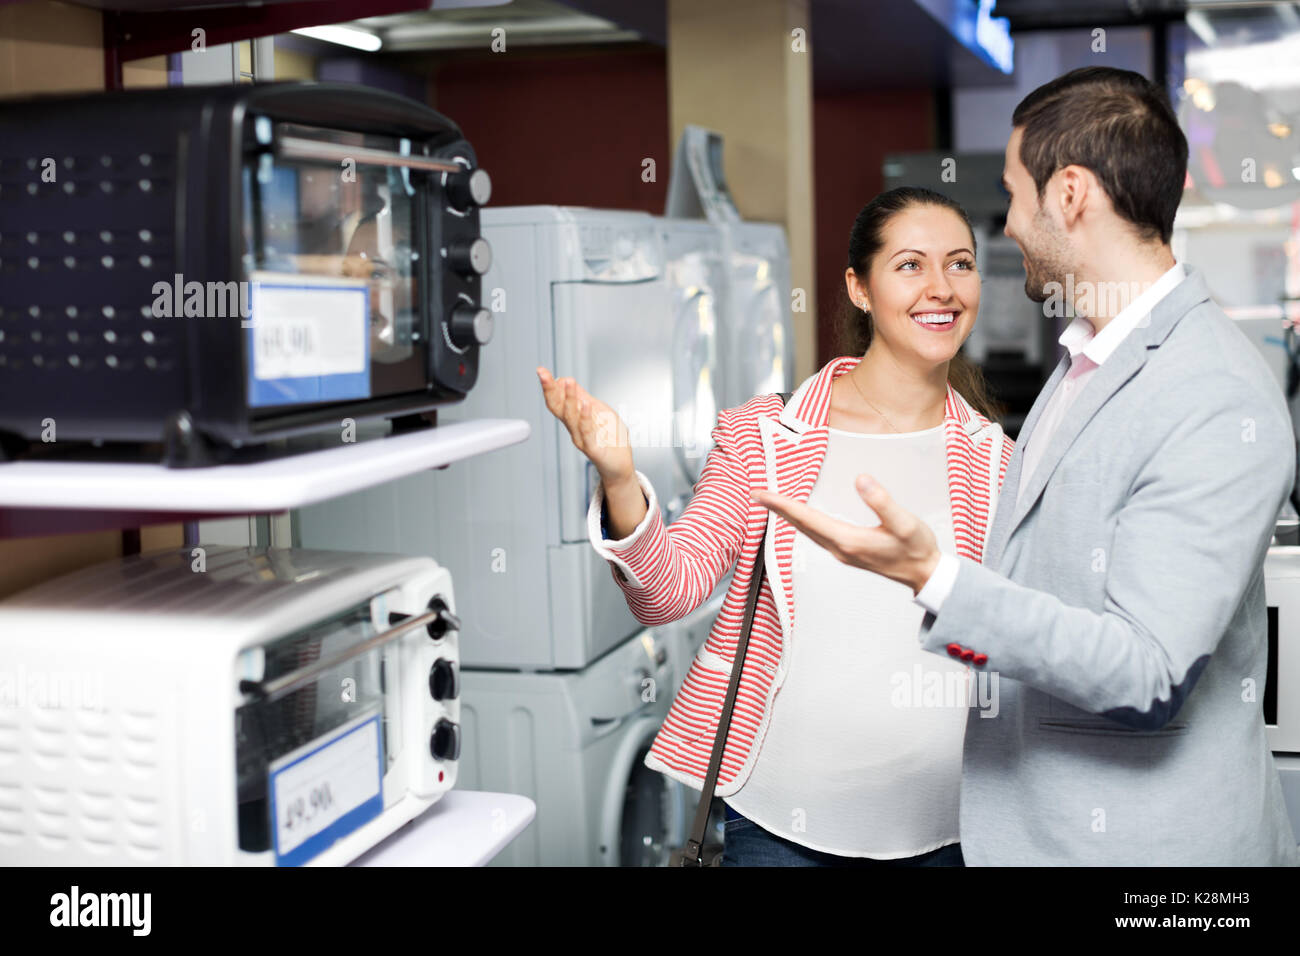 Smiling family couple choosing new microwave in supermarket. Focus on the woman Stock Photo